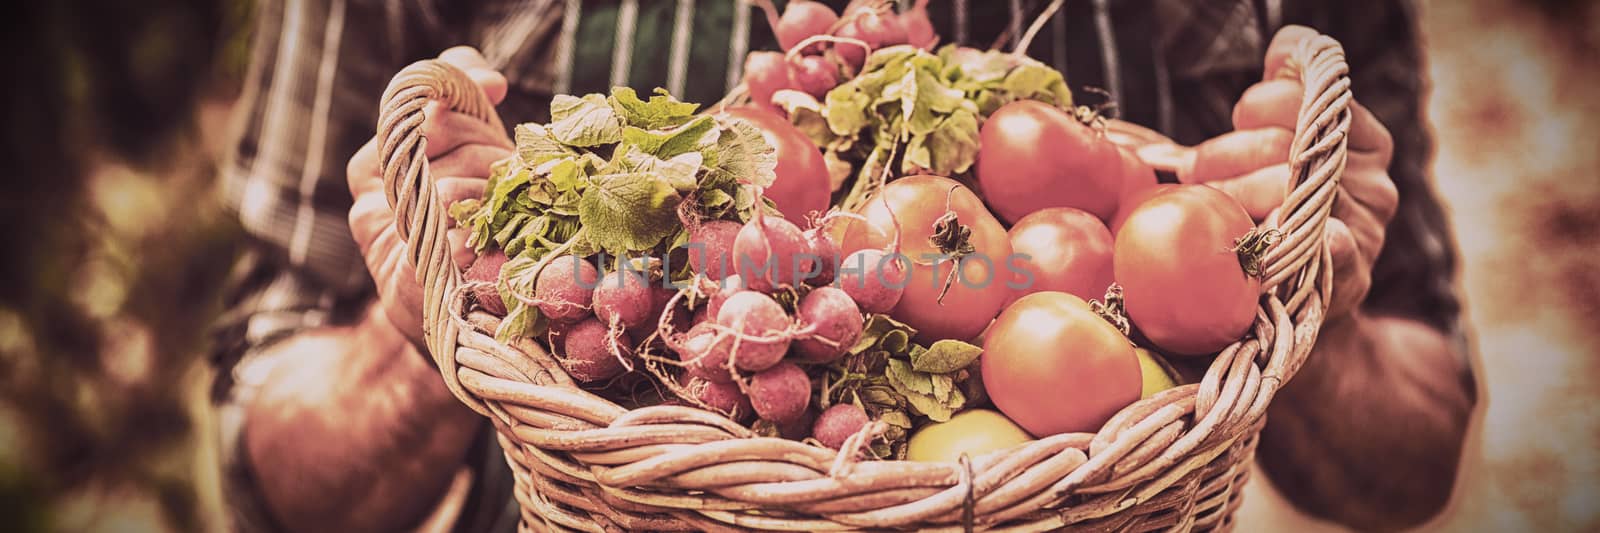 Midsection of farmer holding basket of vegetables while standing by Wavebreakmedia